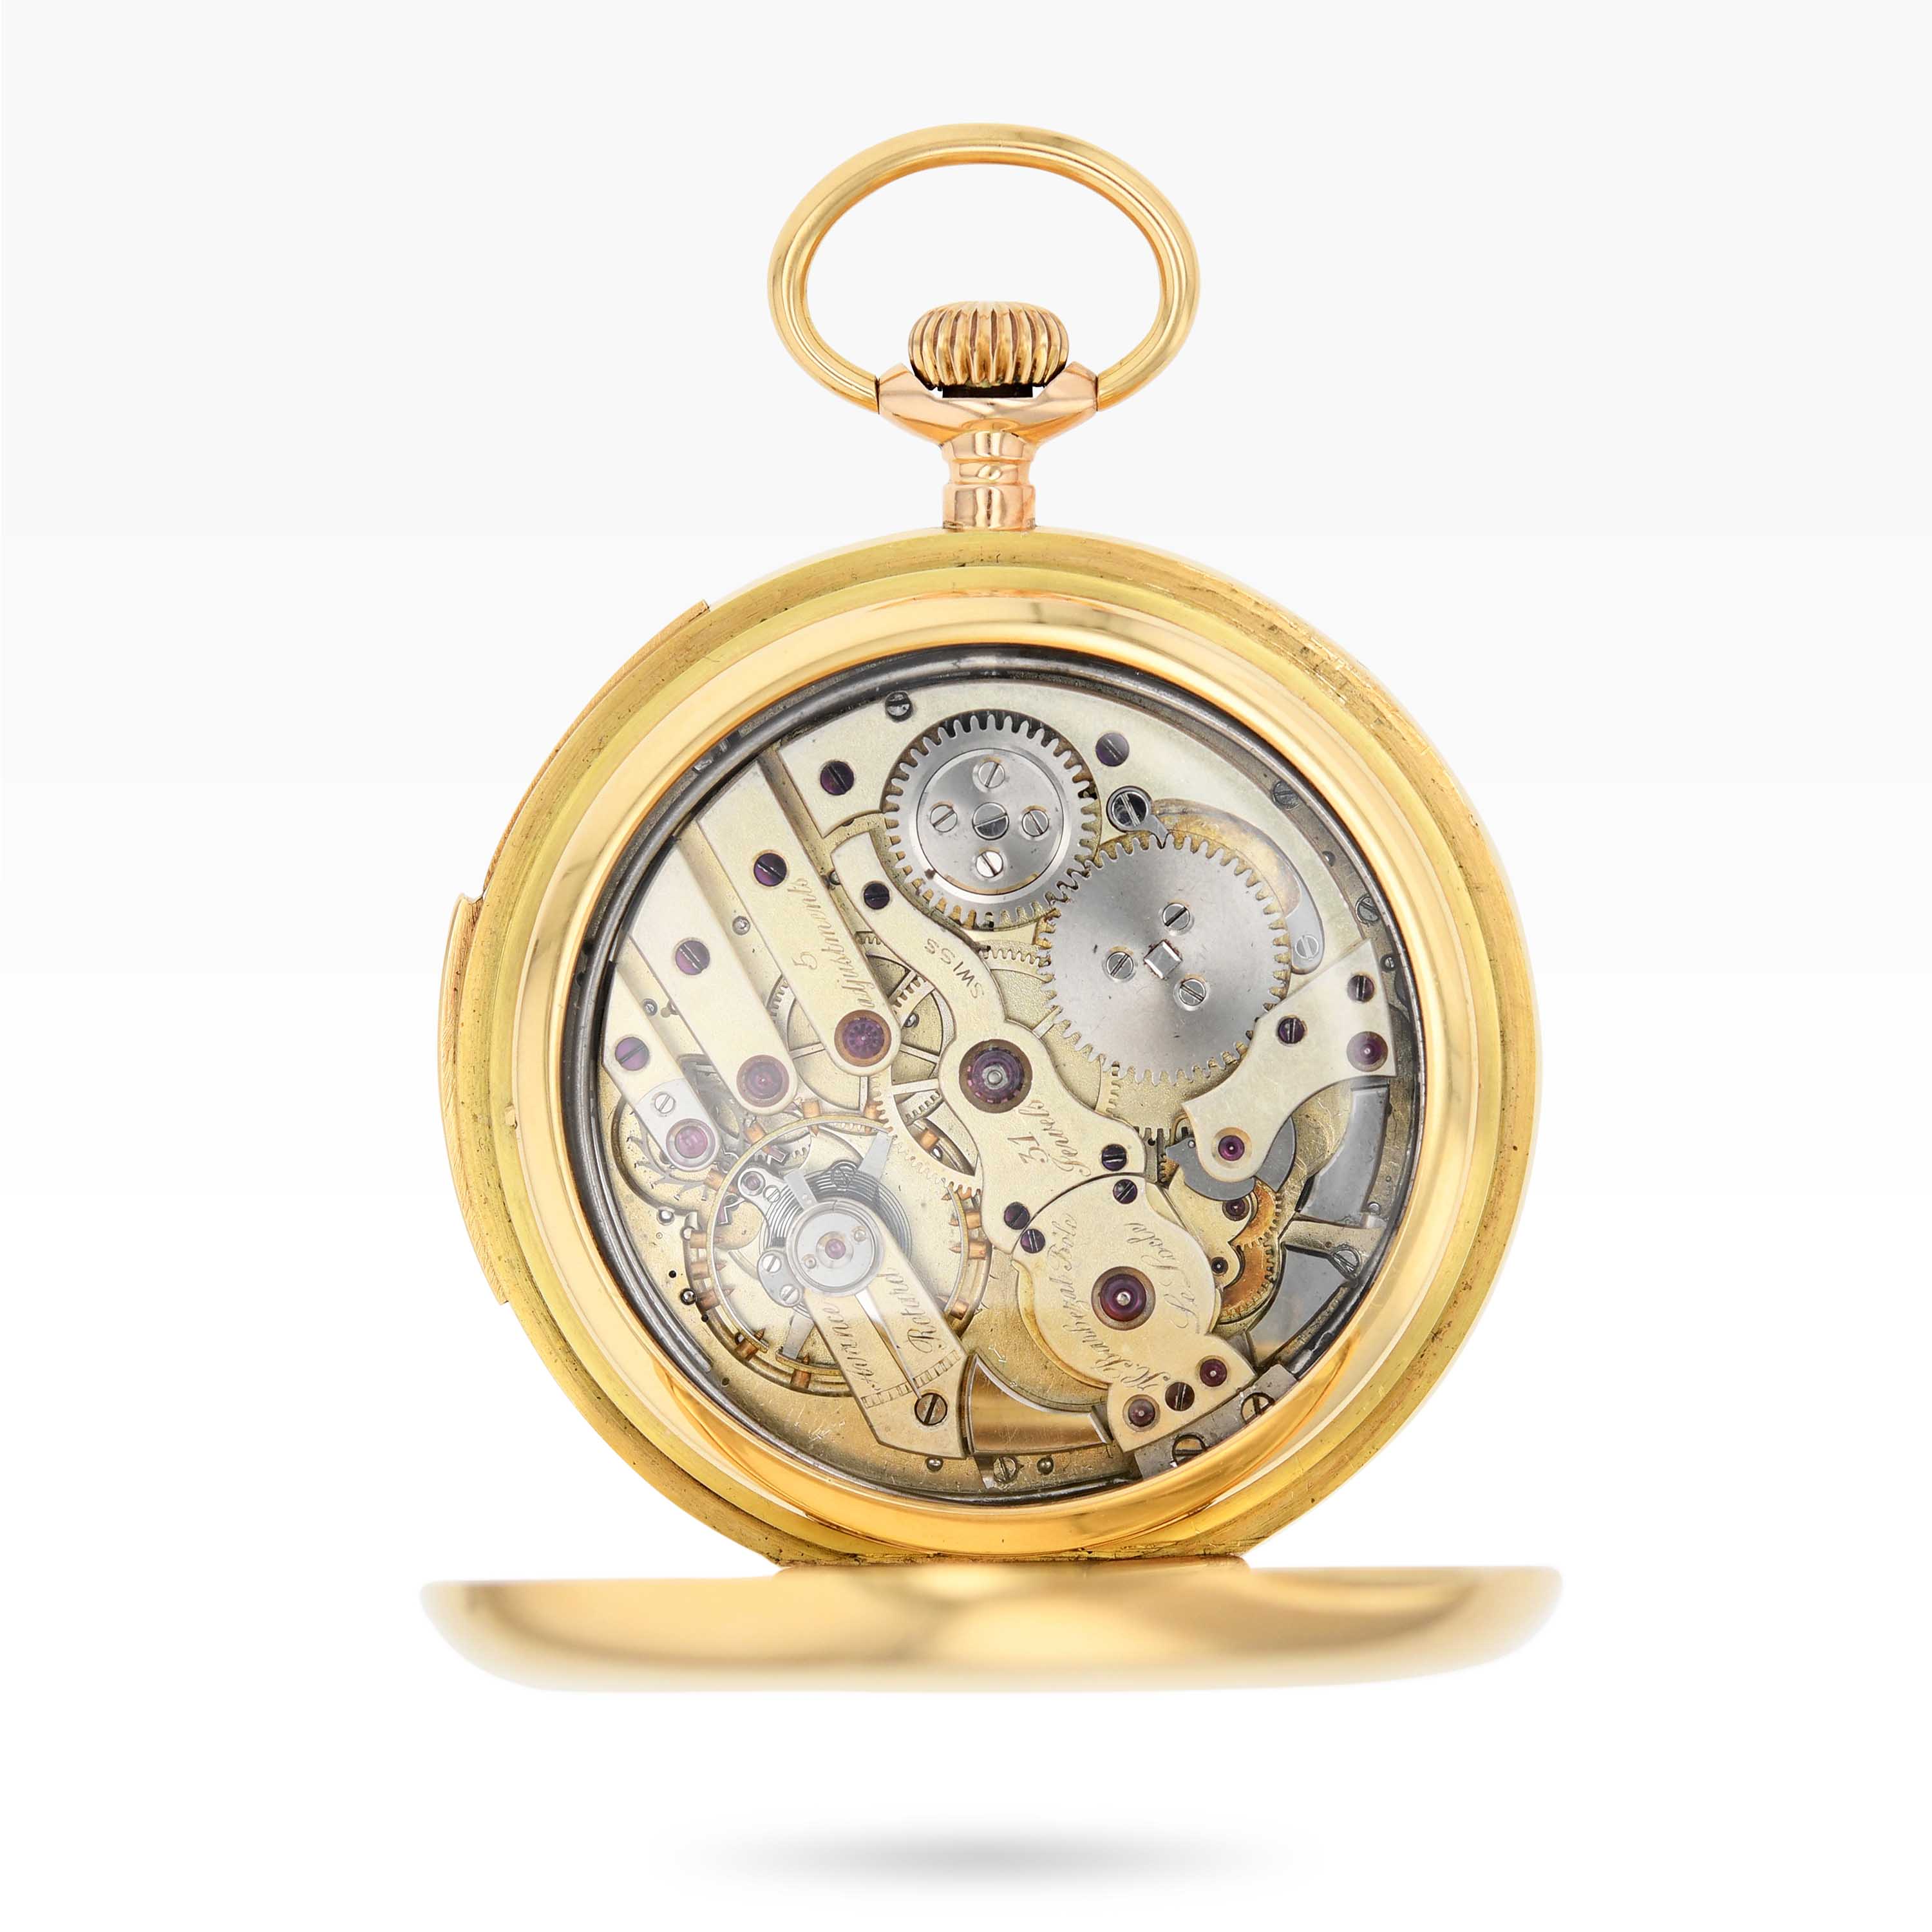 1268PW1 Barbezat-Bôle Le Loche Yellow Gold Minute Repeater Pocket Watch img-main4